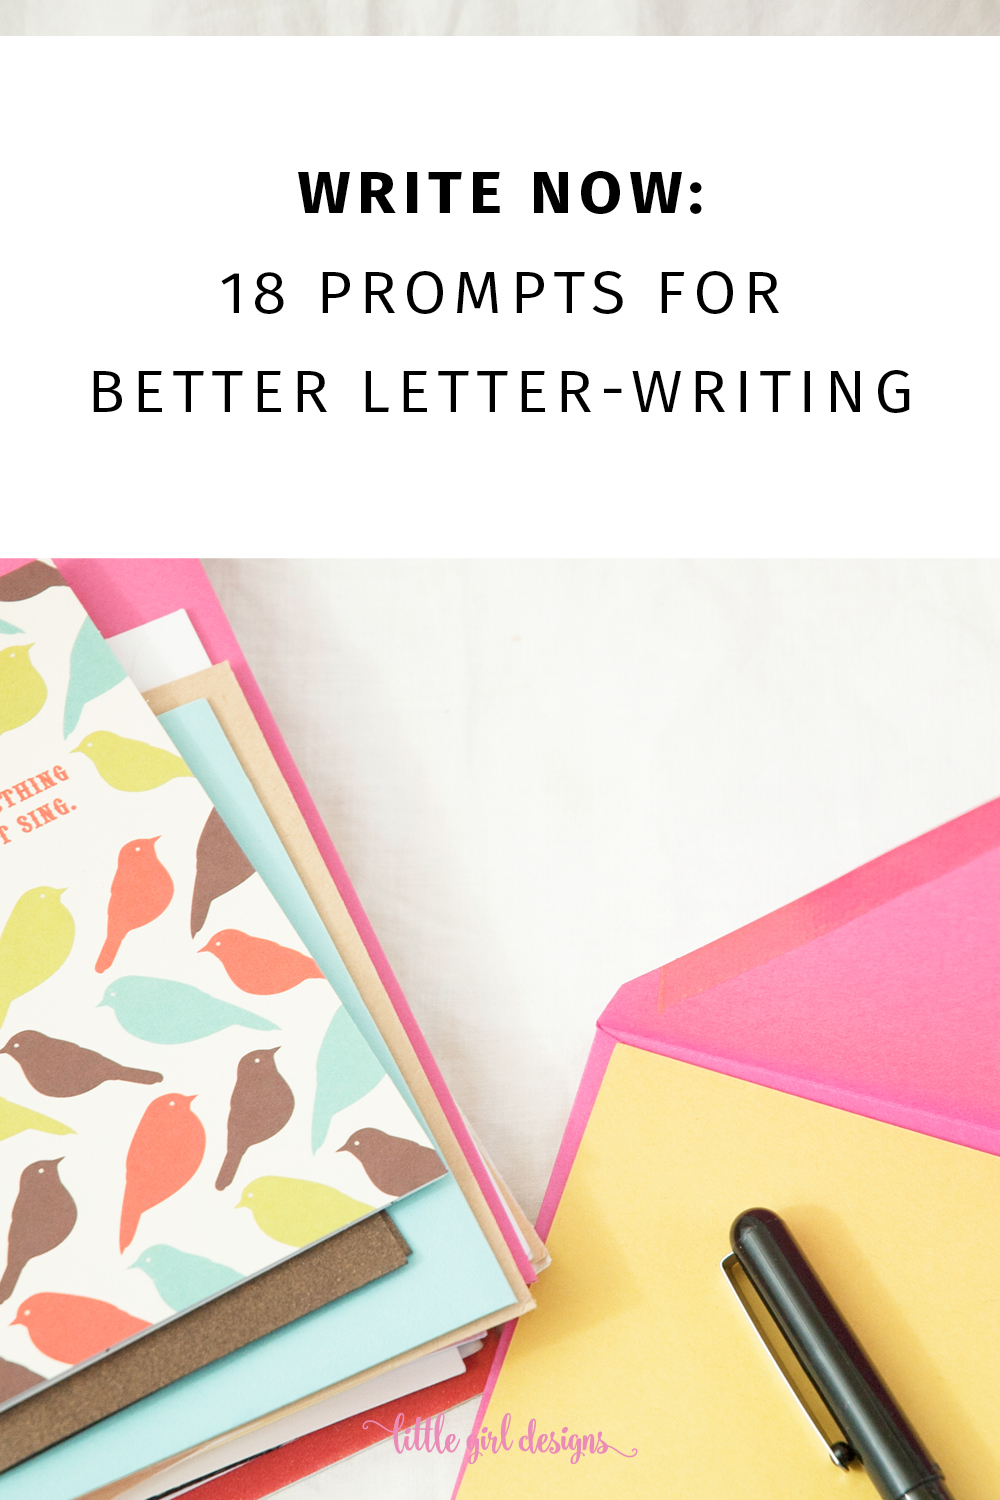 18 letter writing prompts that will get you inspired to pull out a pen and write an old fashioned letter. These ideas are also great for pen pals. You might just make someone's day!